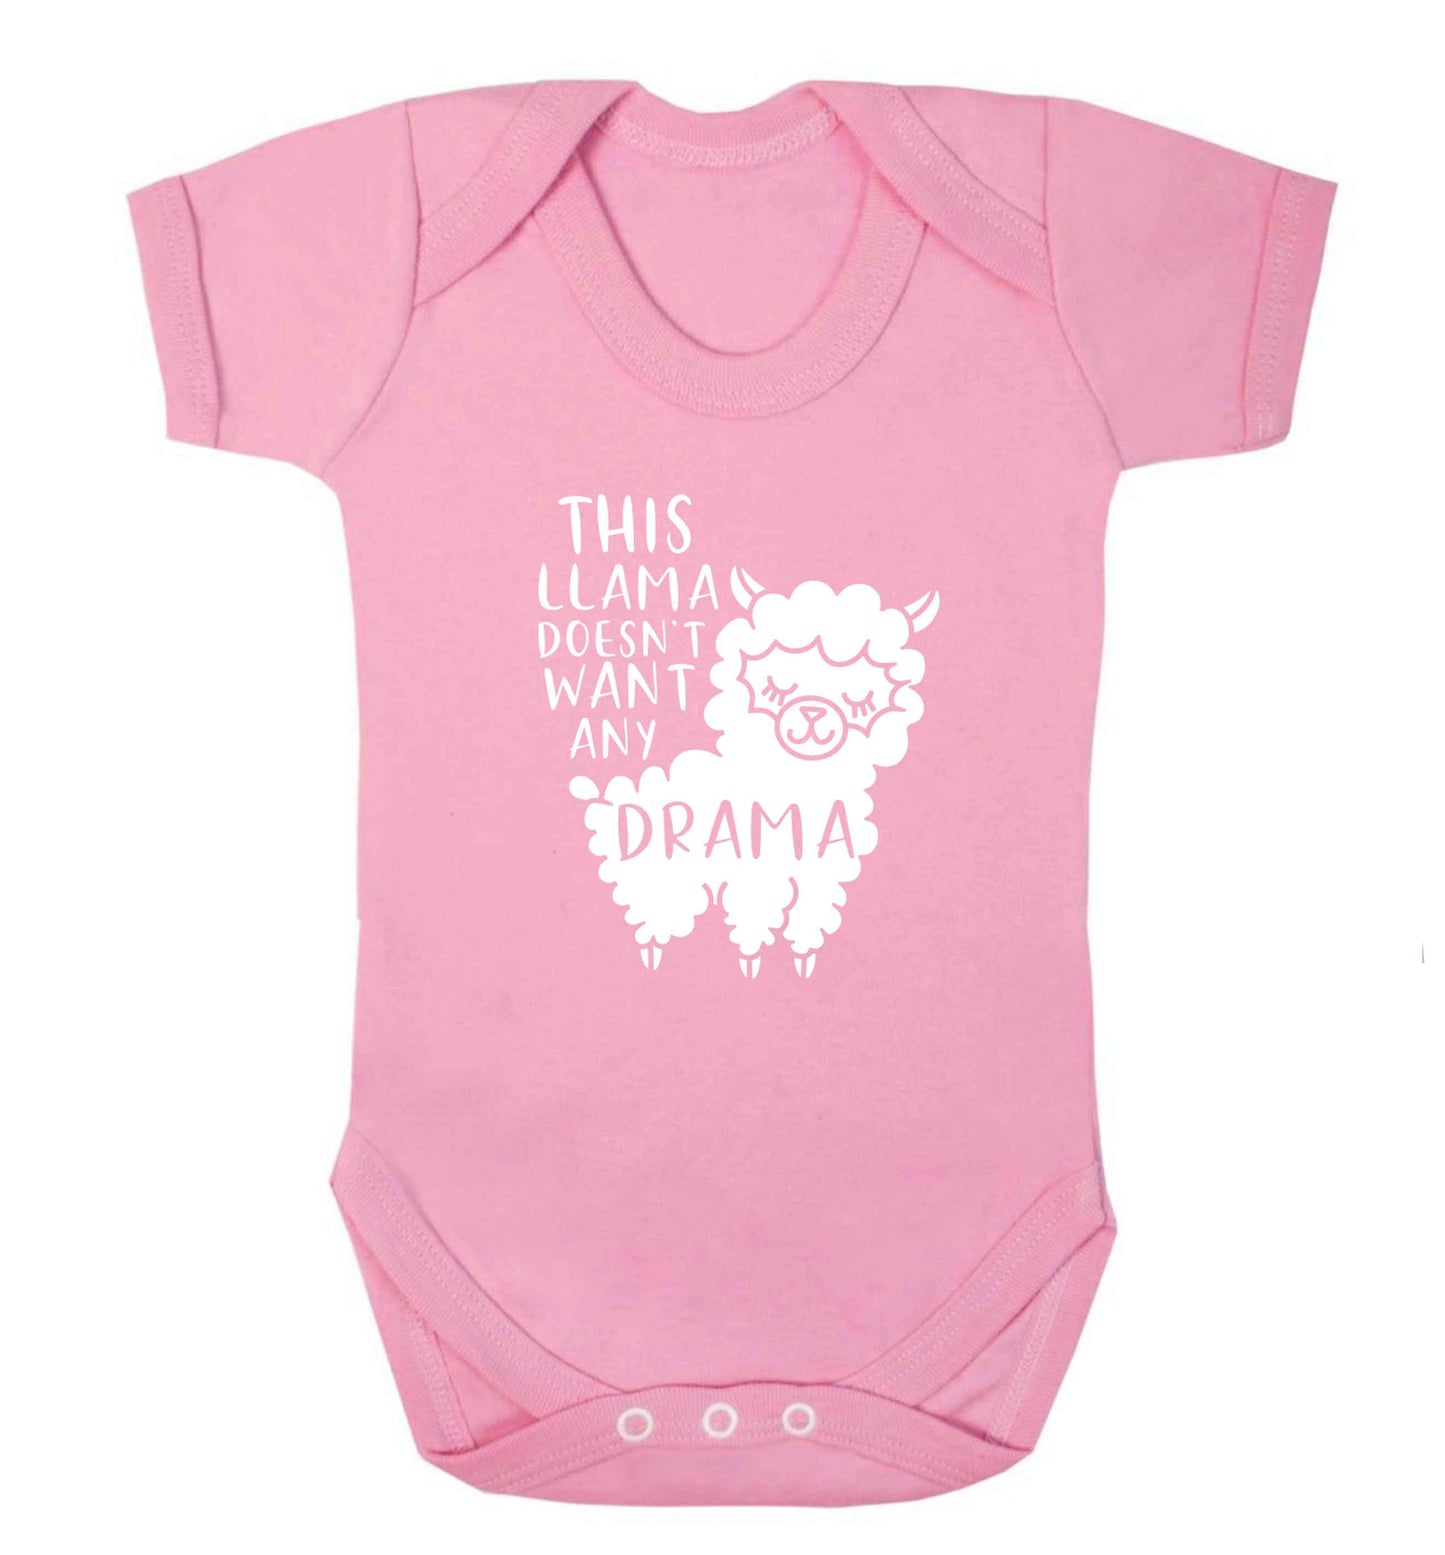 This Llama doesn't want any drama baby vest pale pink 18-24 months